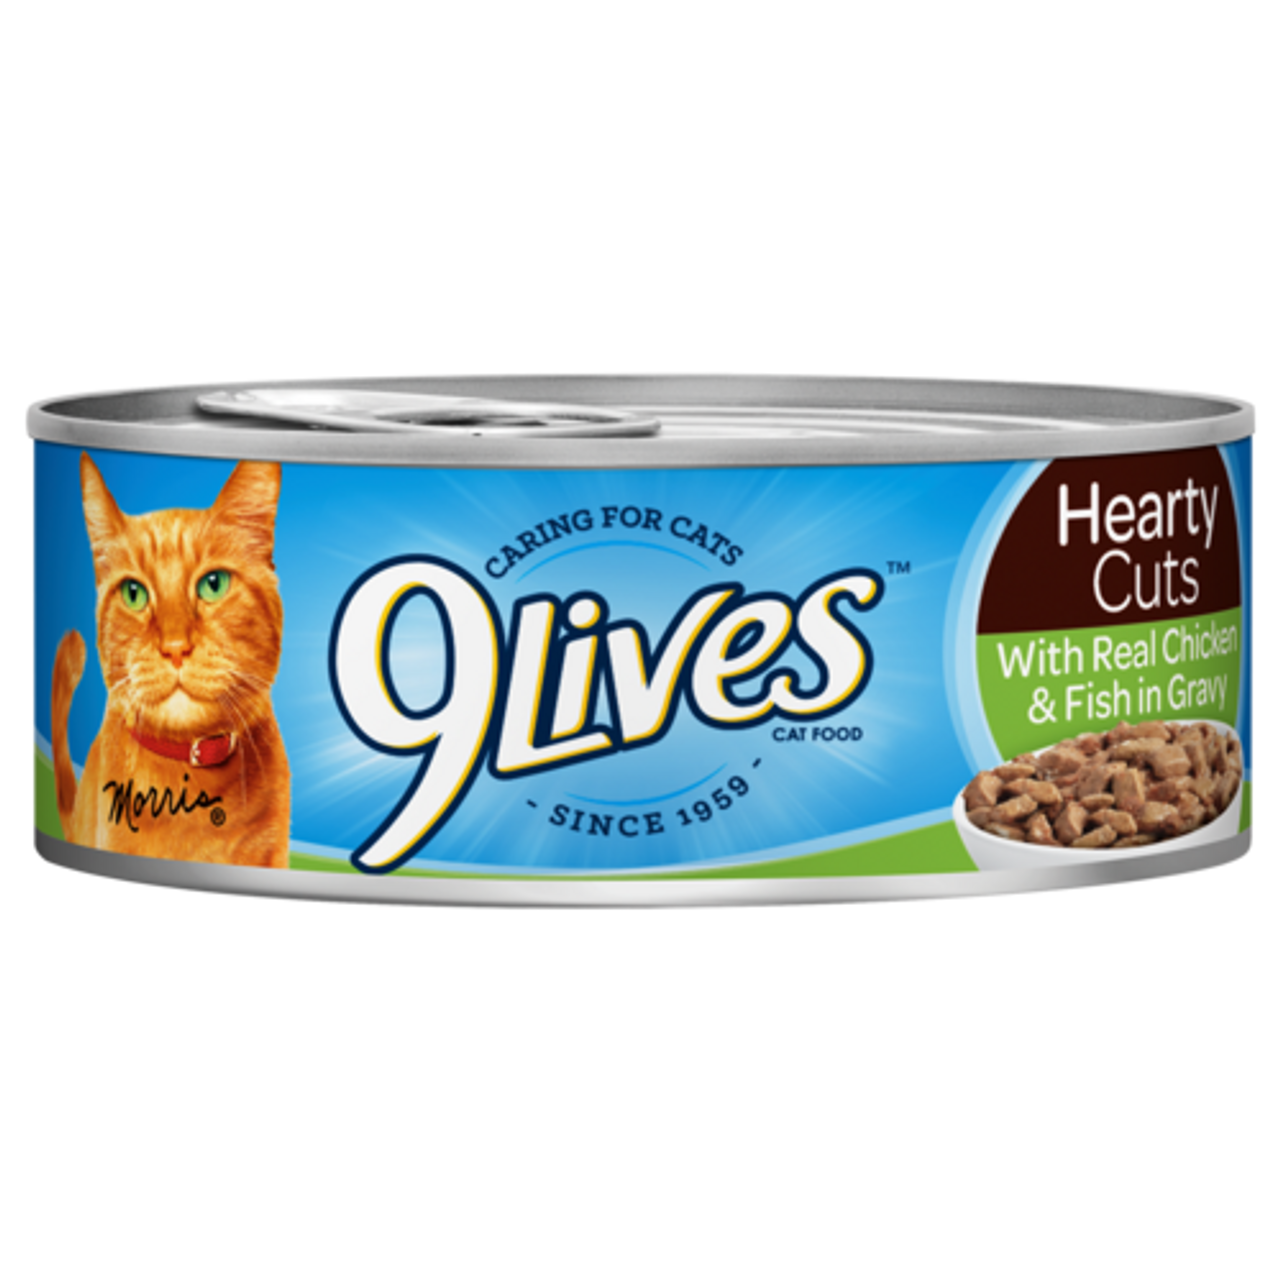 9Lives Cat Food With Real Chicken & Fish in Gravy 5.5oz